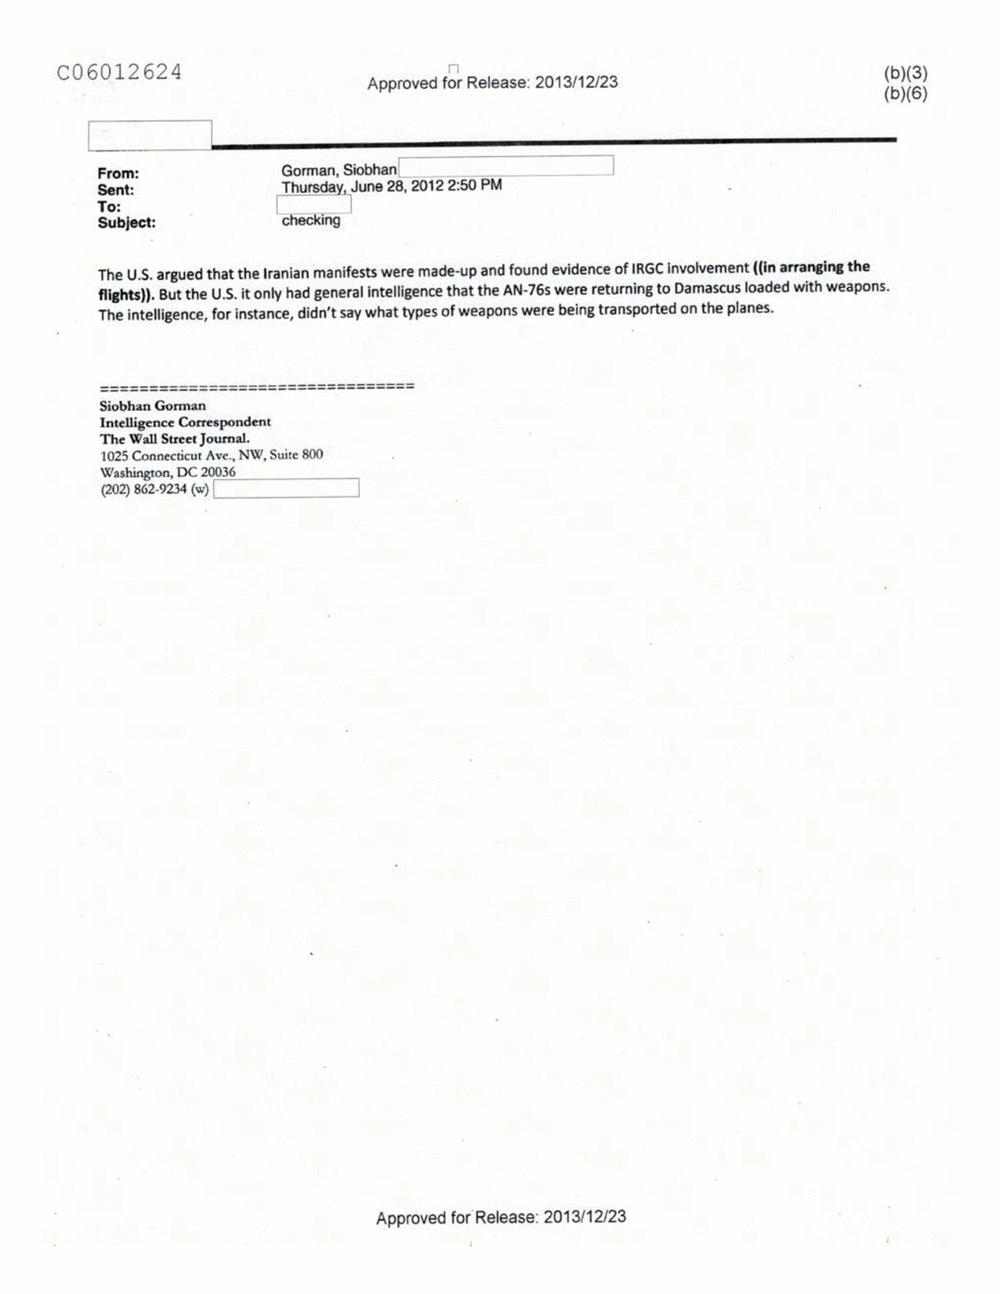 Page 179 from Email Correspondence Between Reporters and CIA Flacks